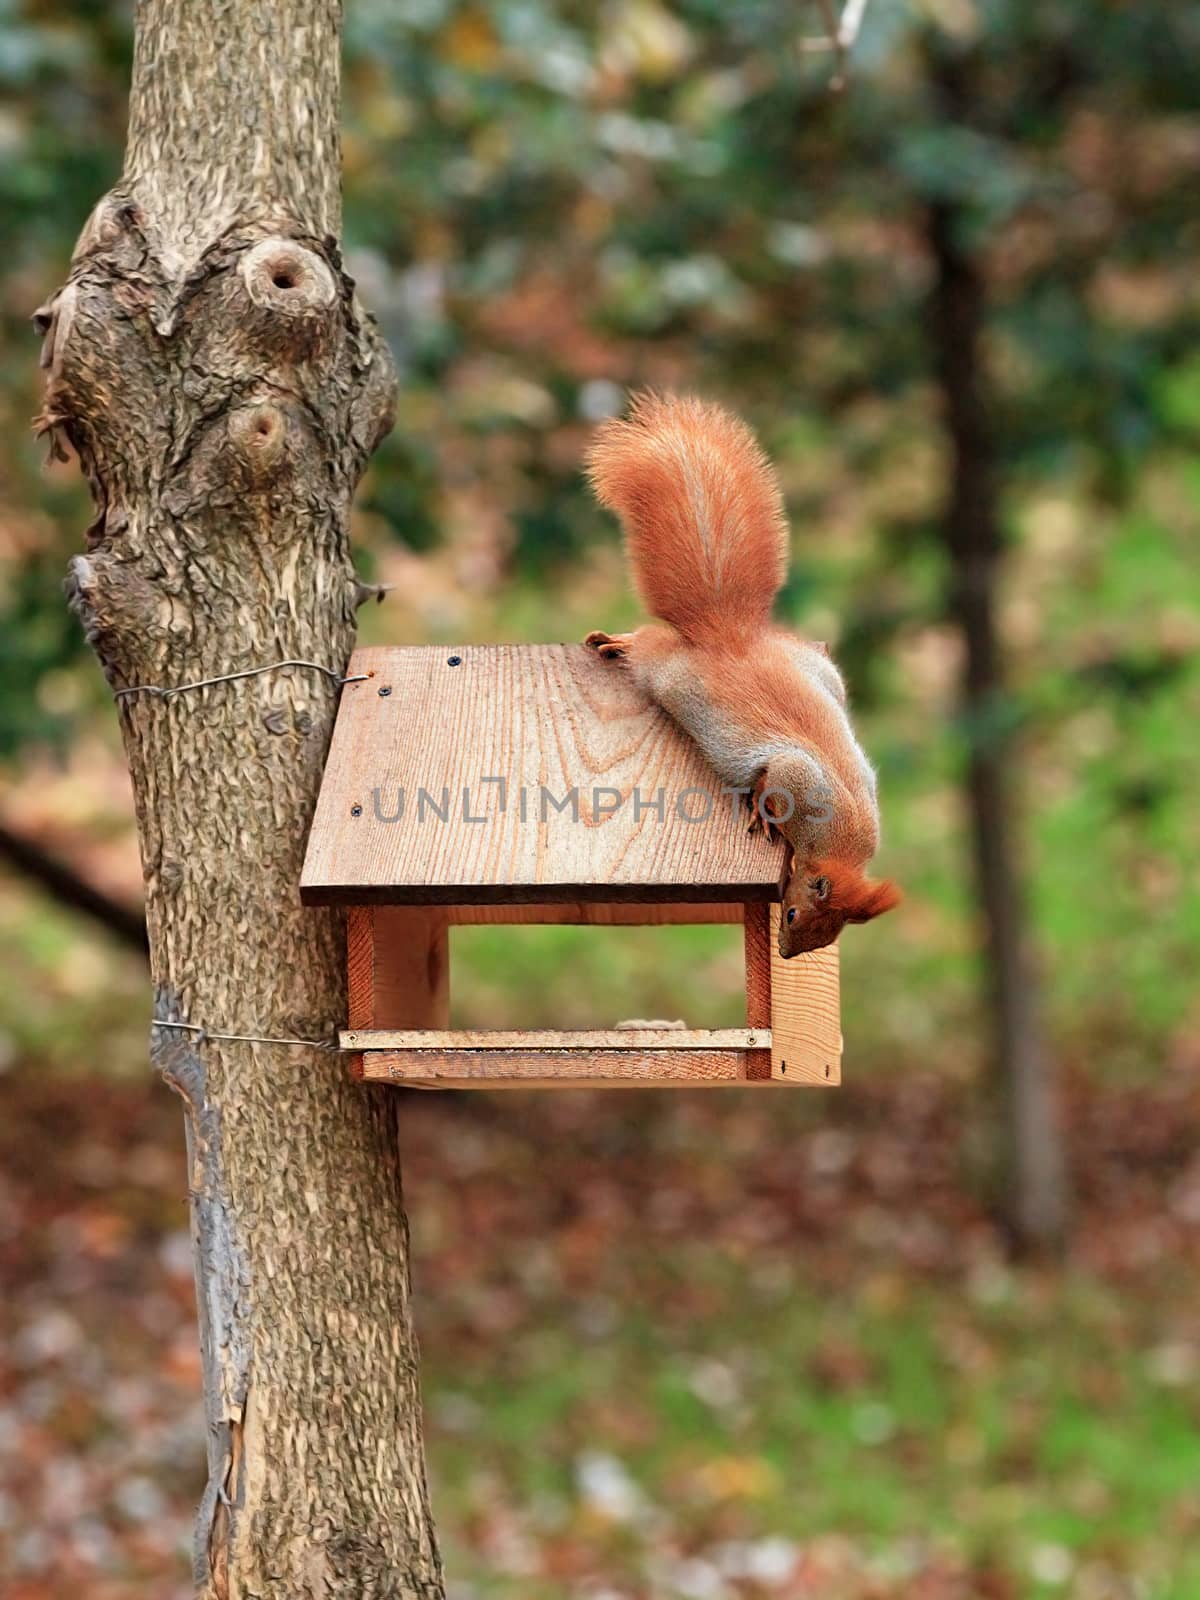 Cute little orange squirrel wants to steal food from a wooden bird feeder that is tied to a tree in a city autumn park, vertical image for social networks.